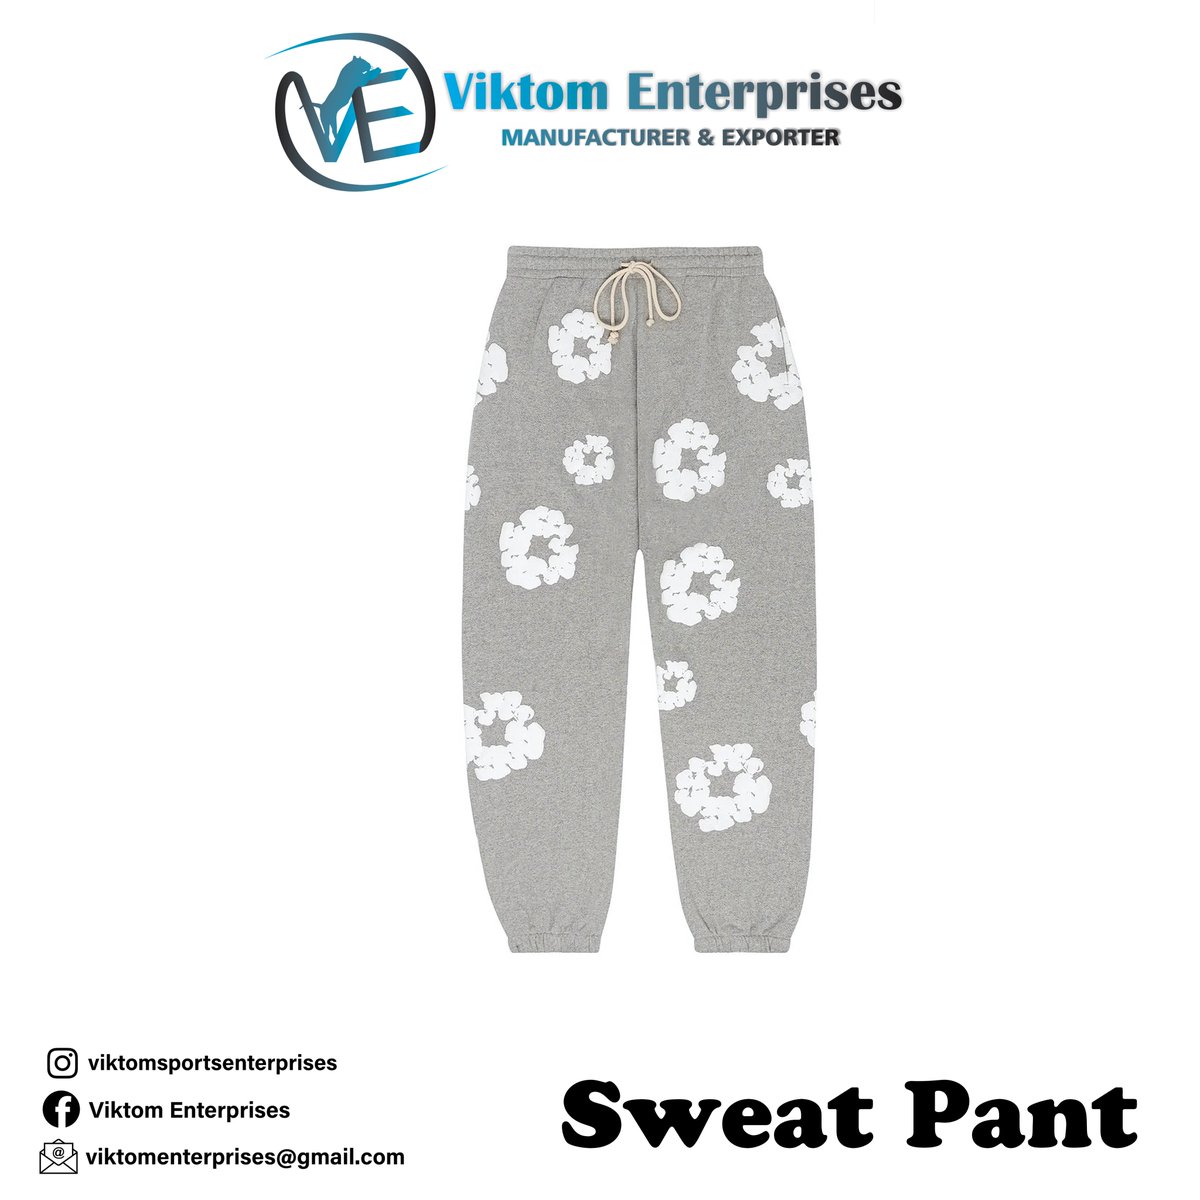 Custom Sweatpant

Custom sublimation , Printing, Tags, Labels :
Worldwide shipping via DHL : Export Quality, Quick Production Time for custom orders

#sportswear #fitnesswear #casualwear #joggerpants #joggers #joggerstyle #pants #munich #viktomenterprises #joggers #bottom